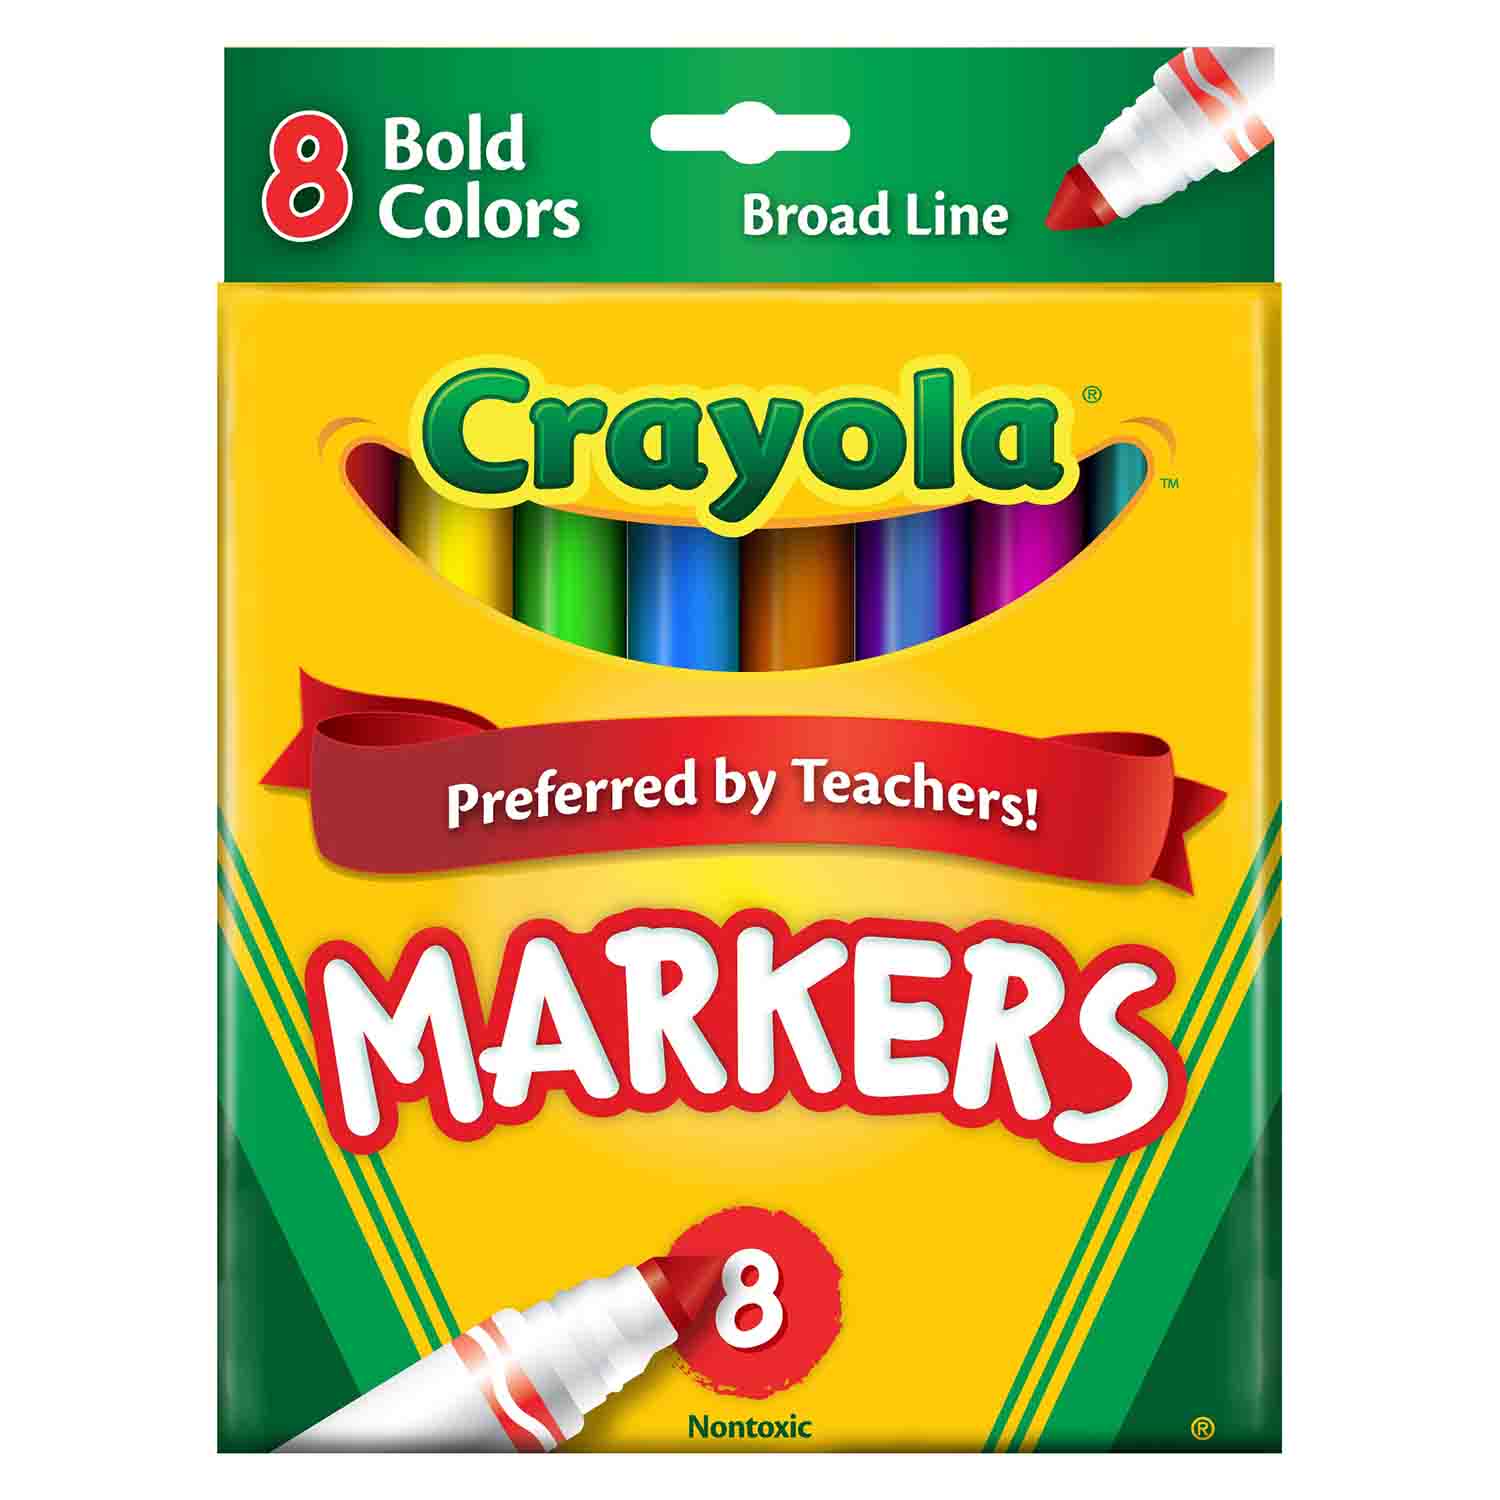 Crayola Classic Markers, Bold Colors - 8 count